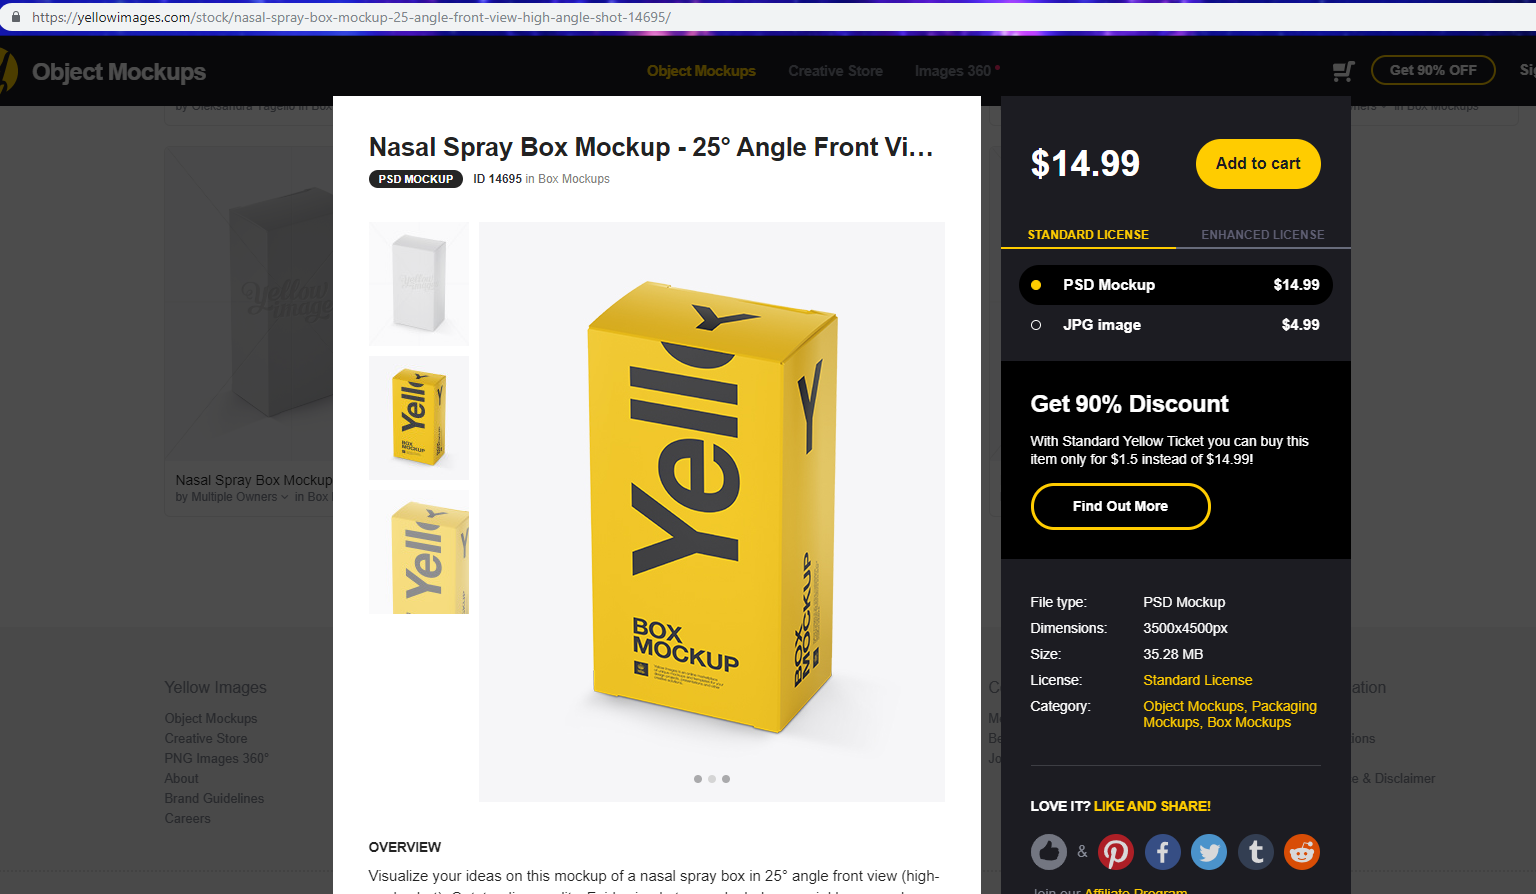 Download Yellowimages Com Product Mockup Shots The Fastlane Entrepreneur Forum Yellowimages Mockups